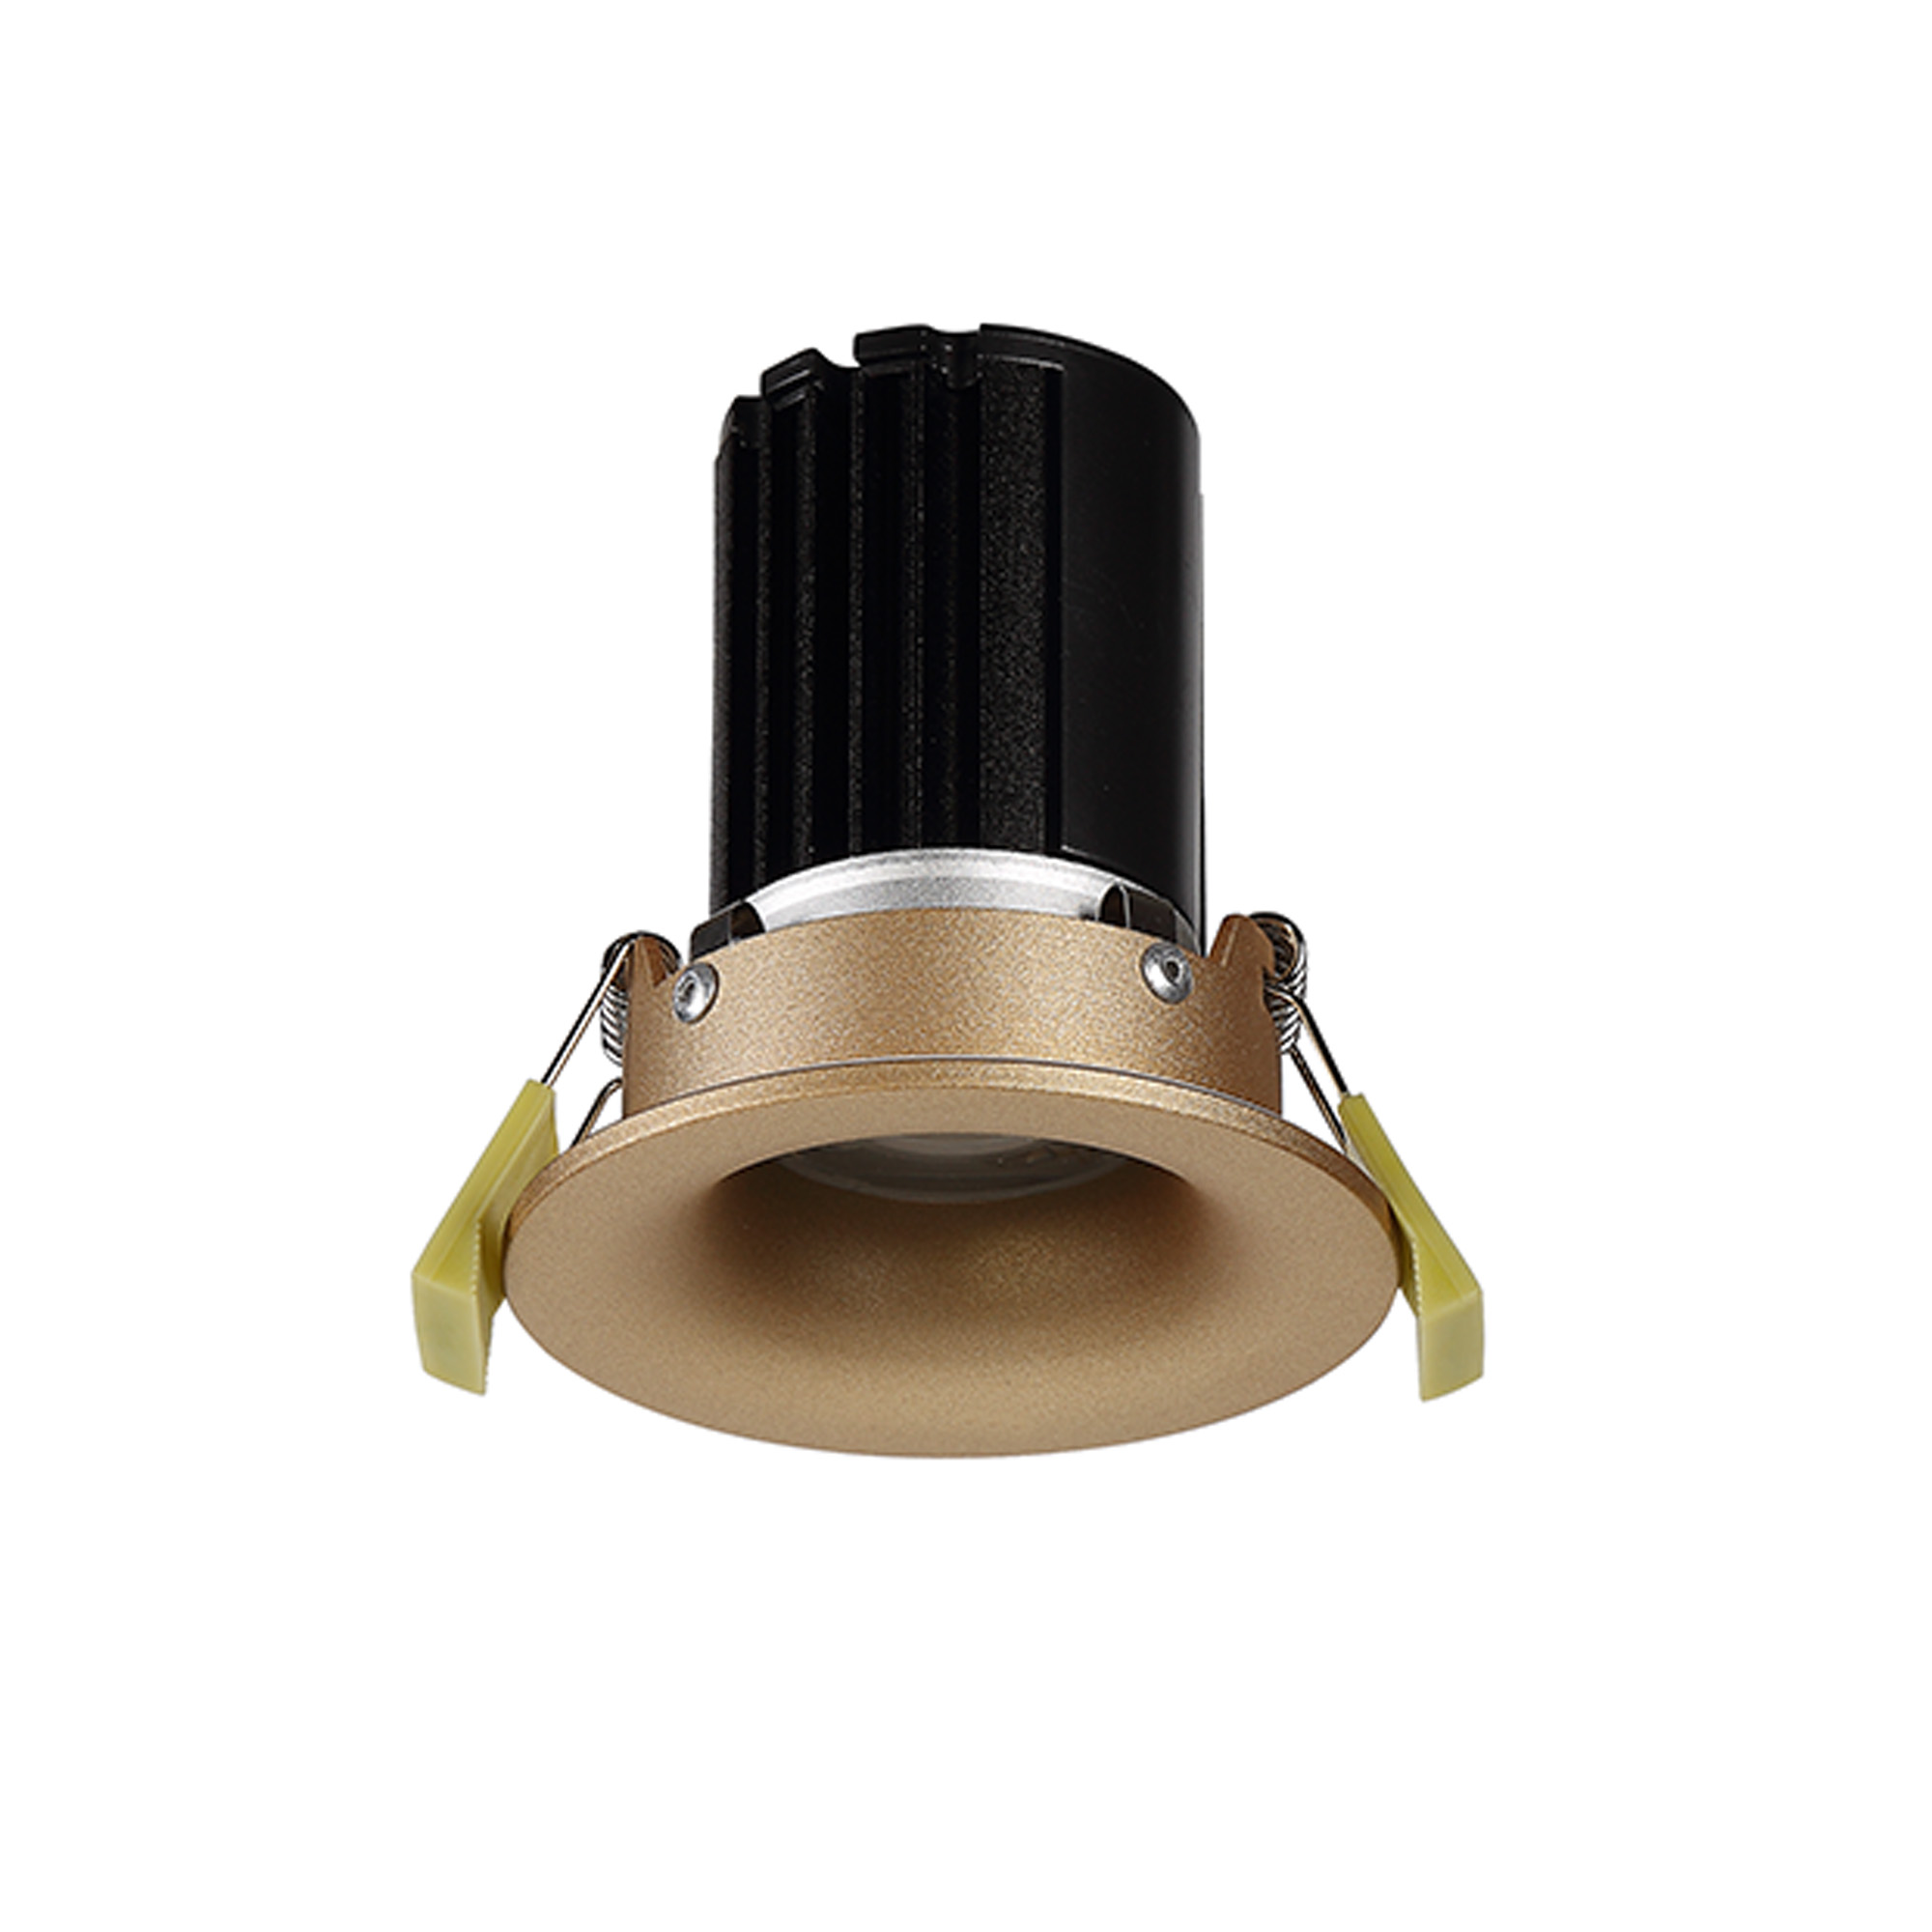 DM202497  Bruve 12 Tridonic powered 12W 3000K 1200lm 36° LED Engine,300mA , CRI>90 LED Engine Champagne Gold Fixed Round Recessed Downlight, Inner Glass cover, IP65